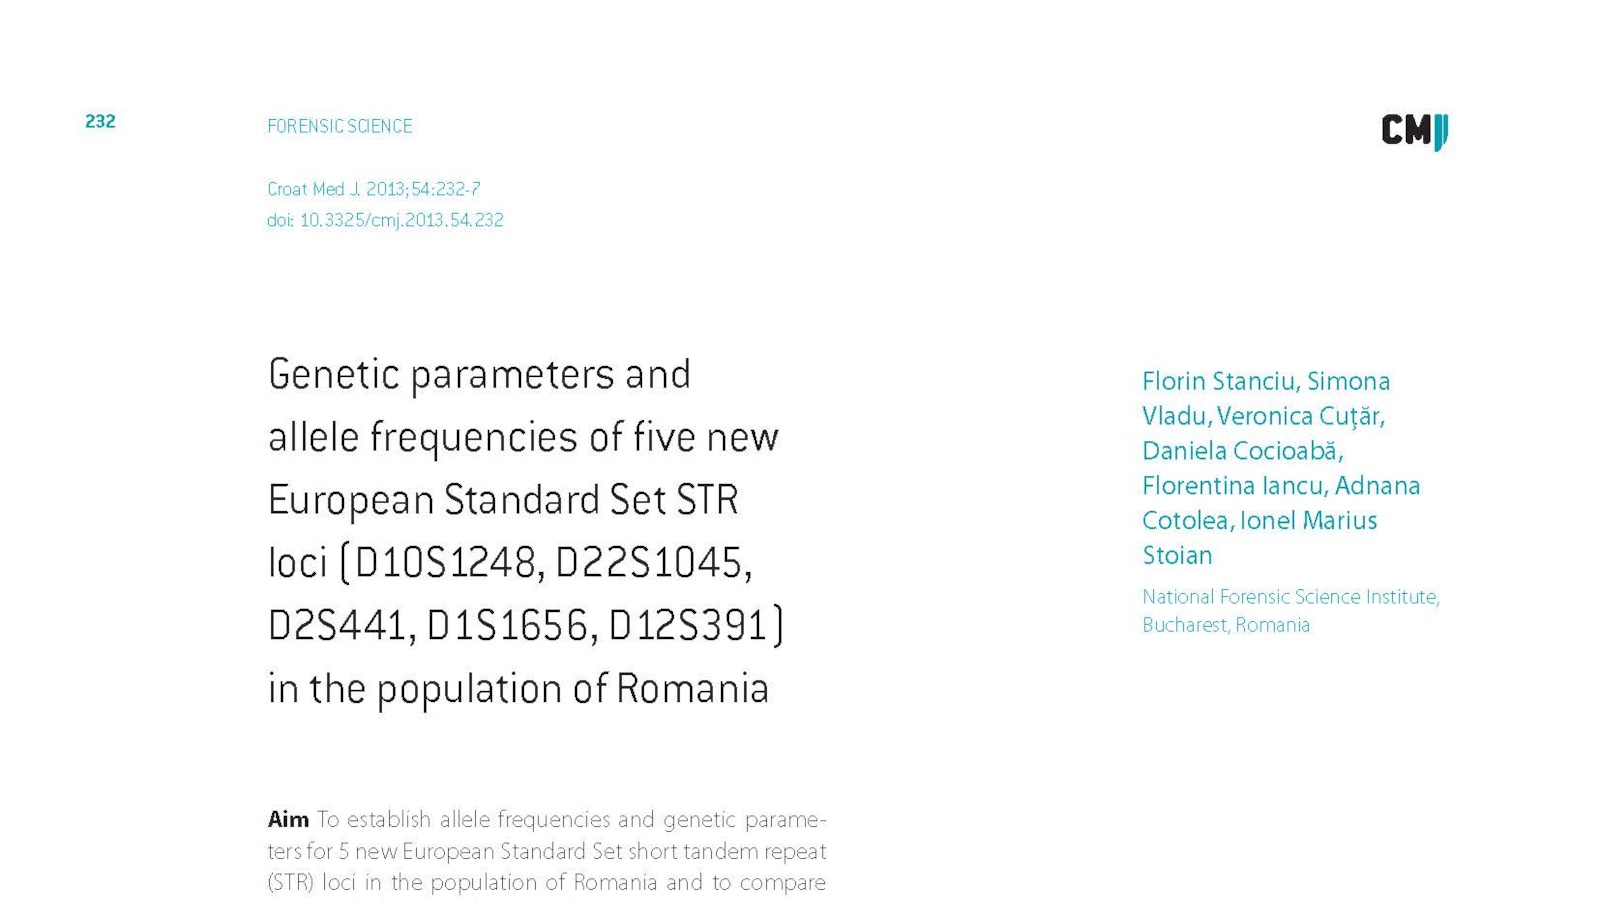 Genetic parameters and allele frequencies of five new European Standard Set STR loci (D10S1248, D22S1045, D2S441, D1S1656, D12S391) in the population of Romania